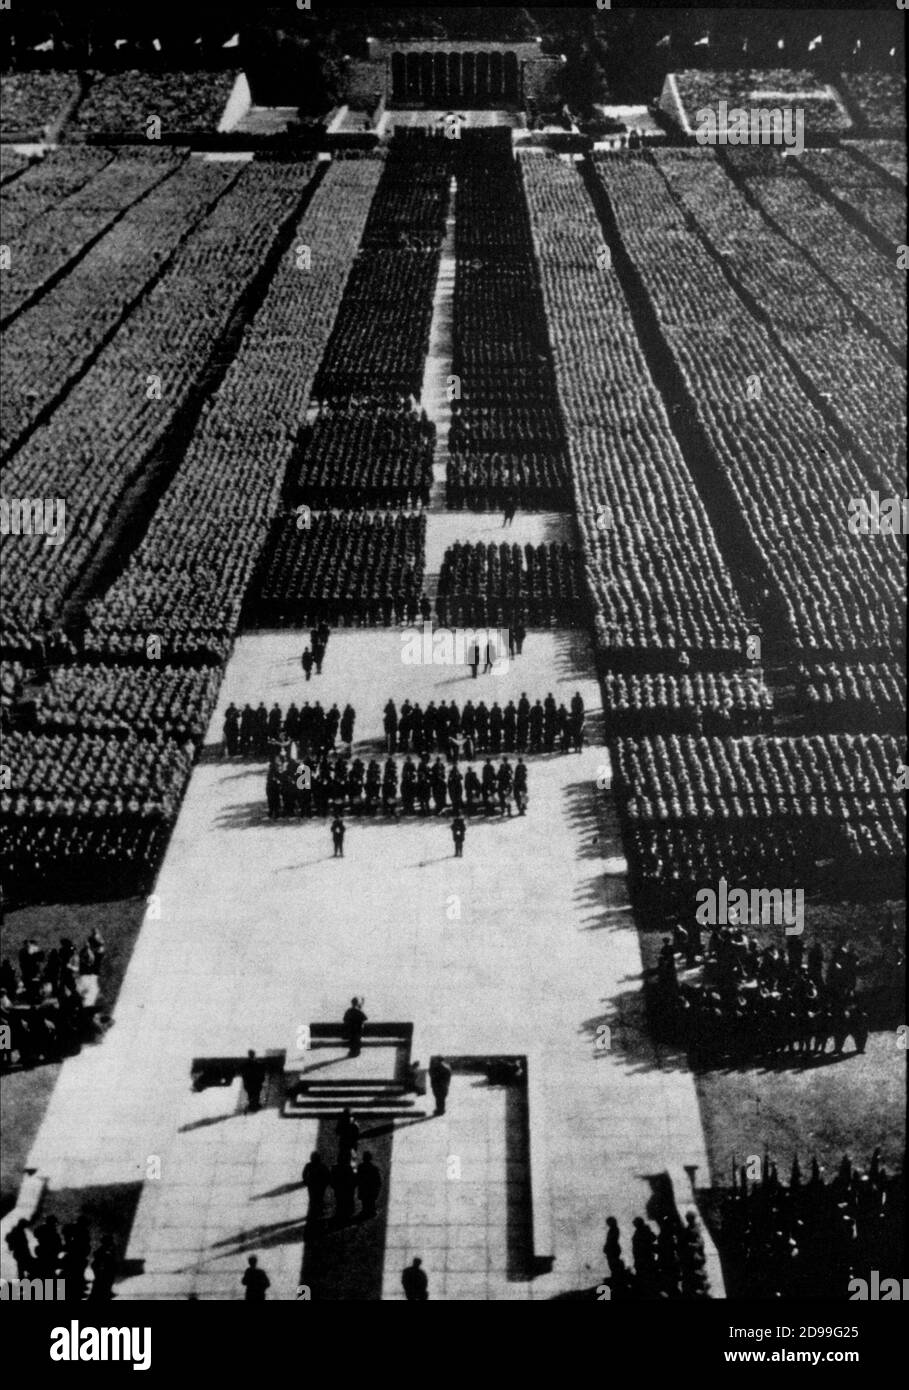 1935 , GERMANY  : pubblicity still from the movie  TRIUMPH DES WILLENS  ( Triumph of The Will - Il trionfo della volontà ) by the german movie director LENI RIEFENSTAHL ( born in Berlin , 22 august 1902 ), shoting during the 6Th National Socialist Party Rally in Nremberg held from 4 to 10 september 1934  - ADOLF HITLER - WWII - SECONDA GUERRA MONDIALE - NAZI - NAZIST - NAZISTA - NAZISMO  - MOVIE - CINEMA - FILM ------  Archivio GBB Stock Photo